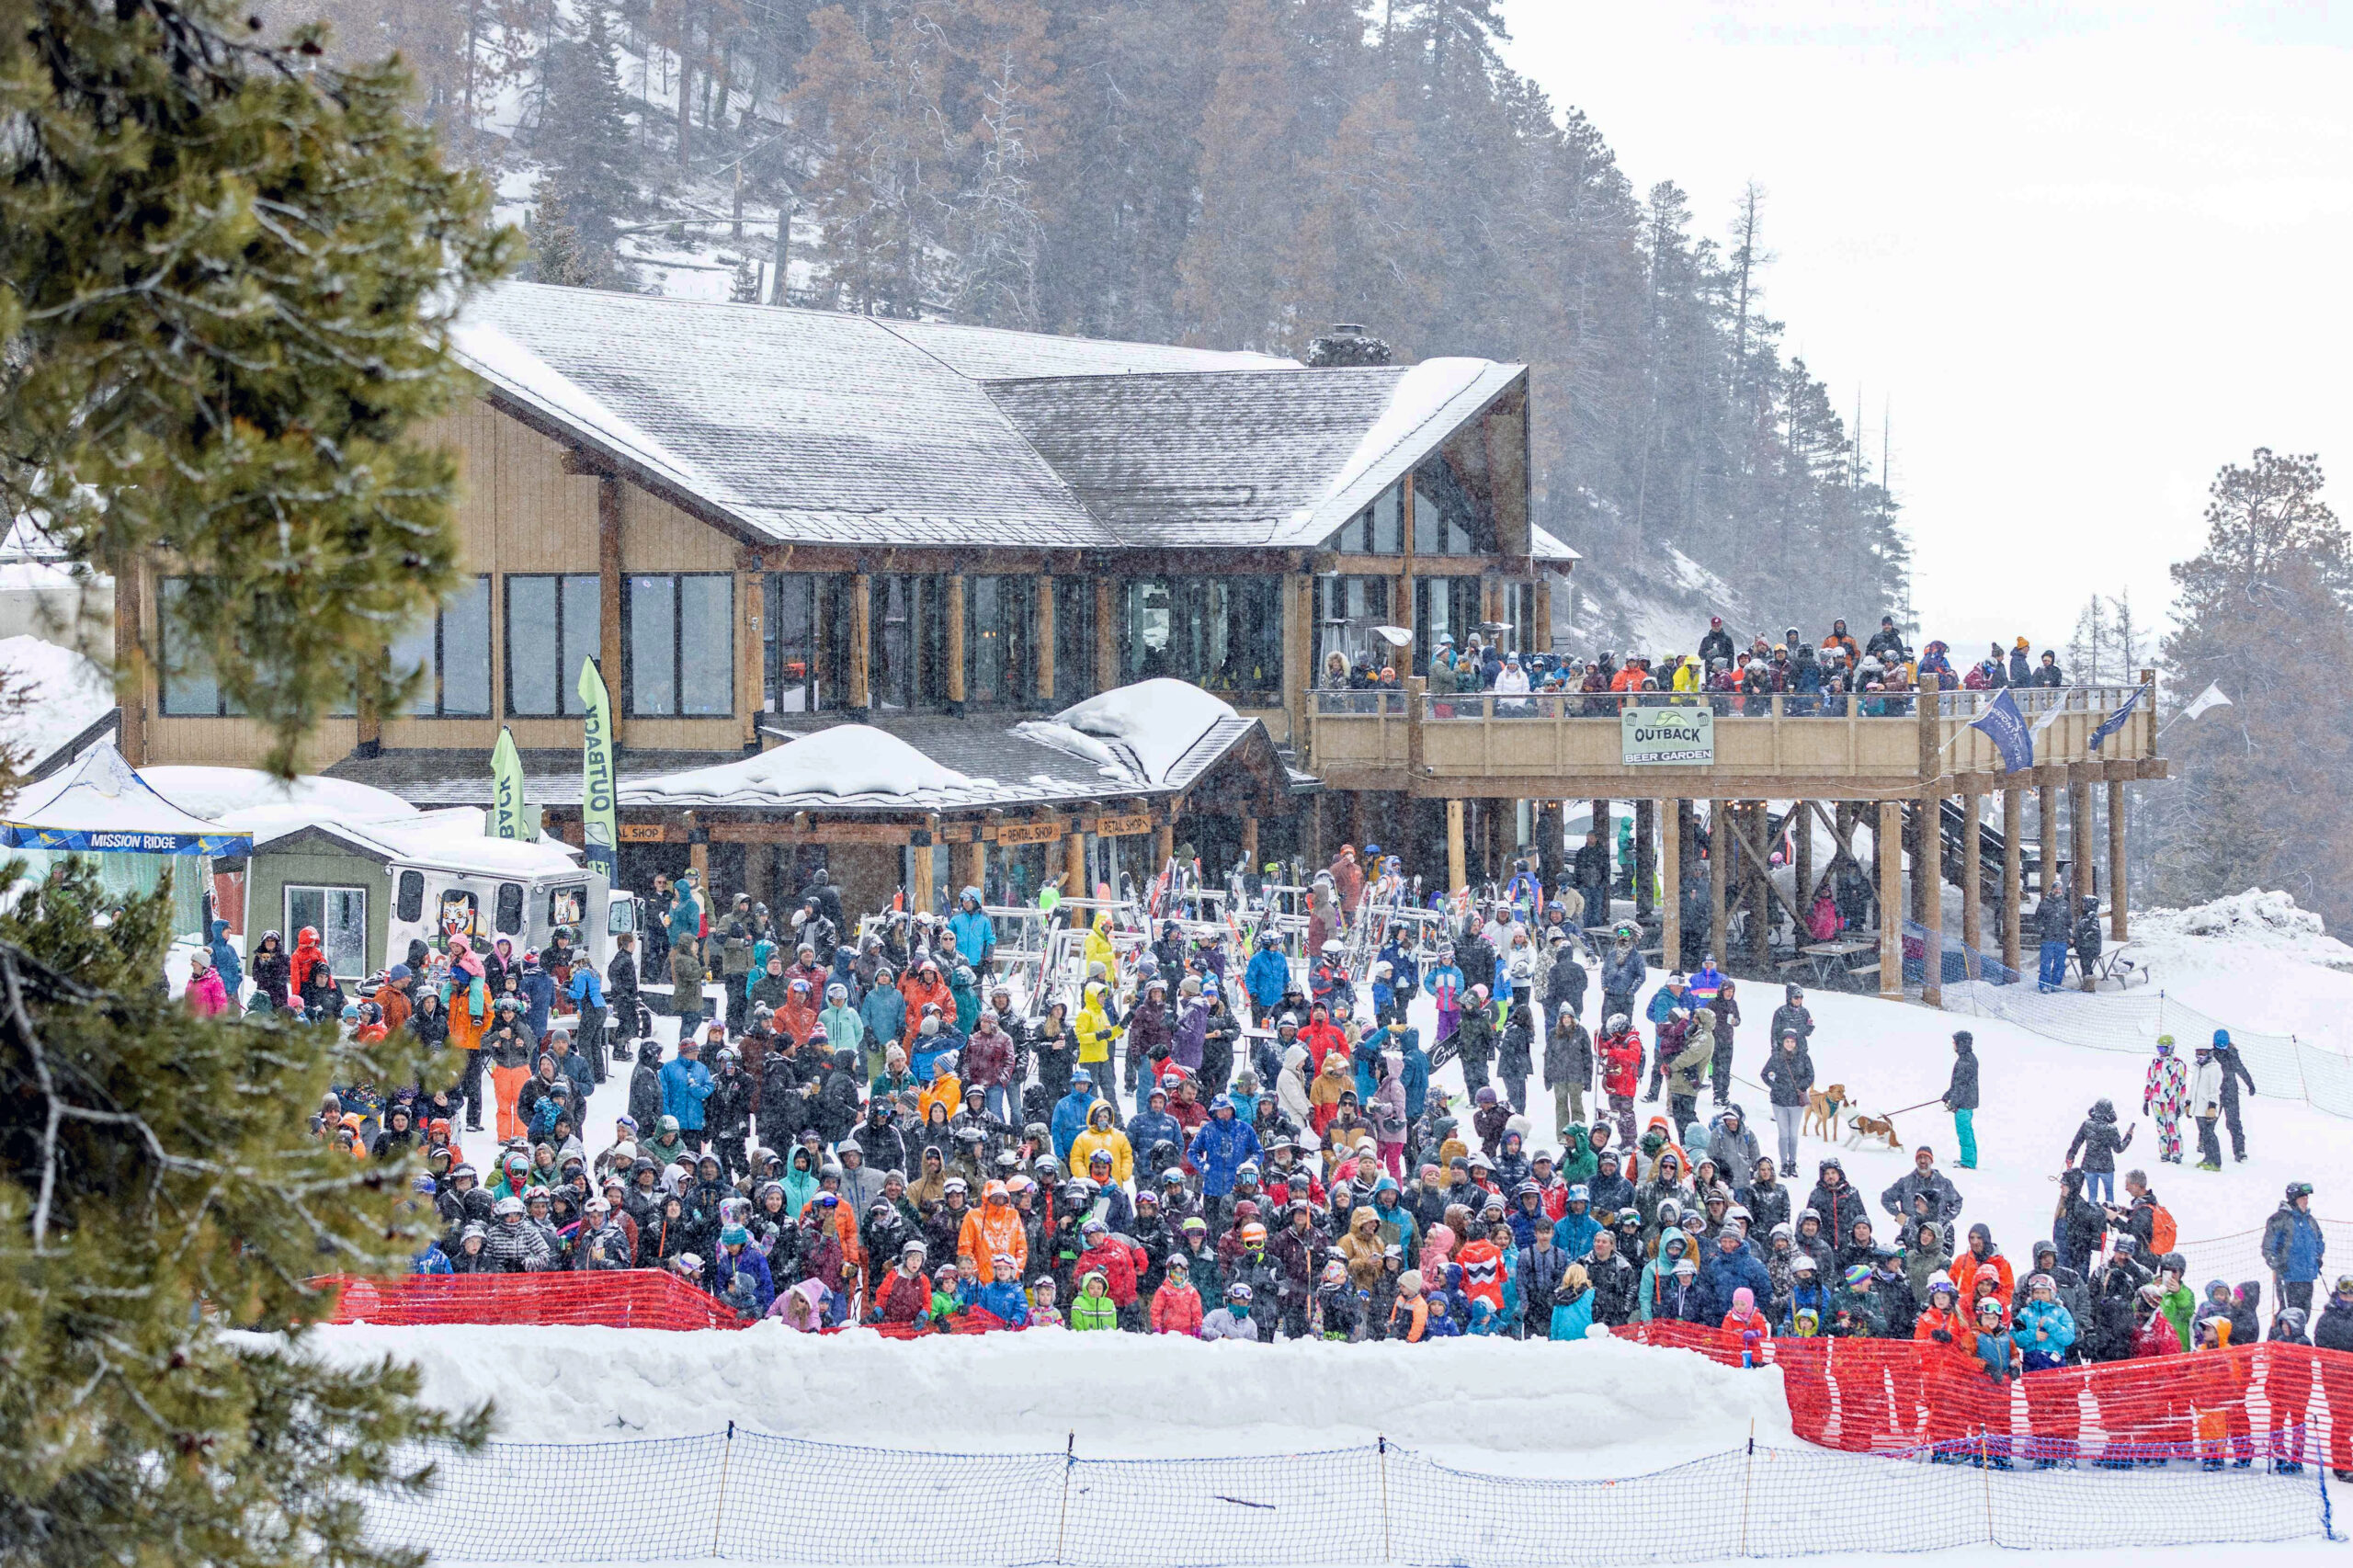 Large group of spectators in the Mission Ridge base area standing in front of the lodge during a snowstorm